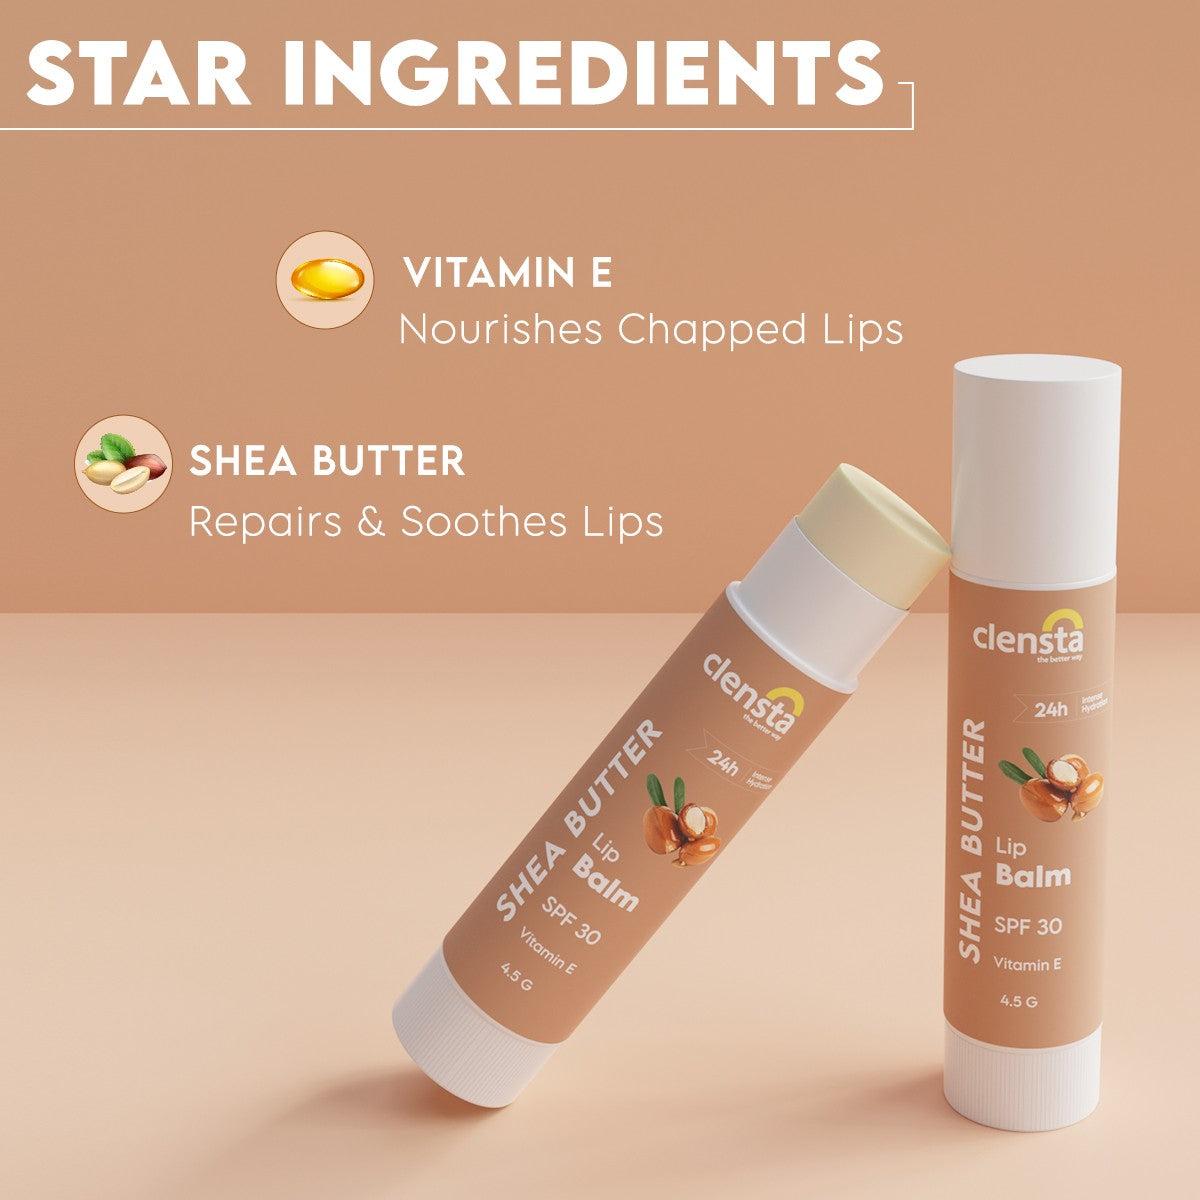 Shea Butter Lip Balm with Shea Butter and Vitamin E to Repair & Moisturize Chapped Lips